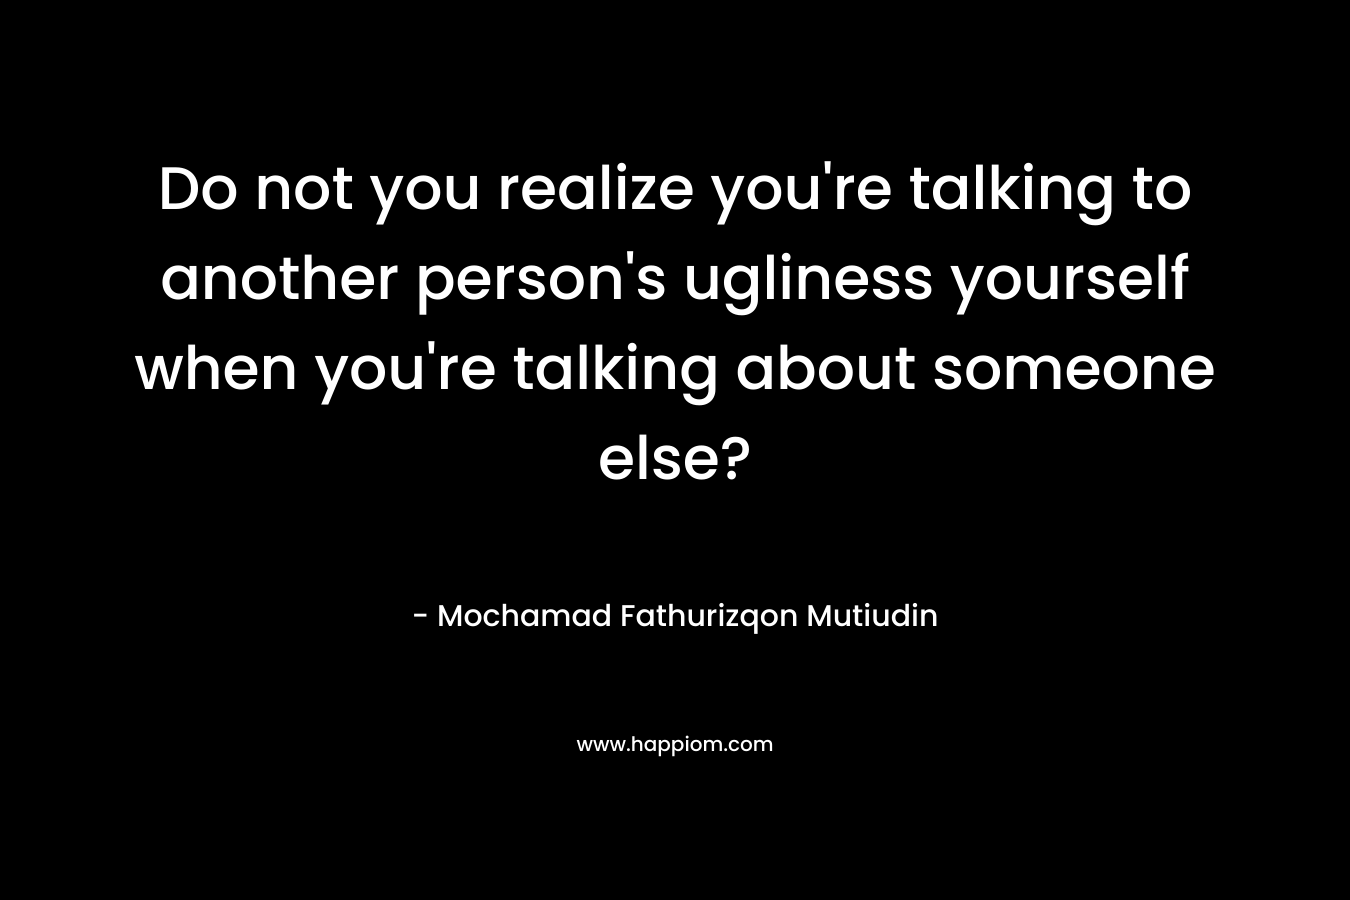 Do not you realize you're talking to another person's ugliness yourself when you're talking about someone else?